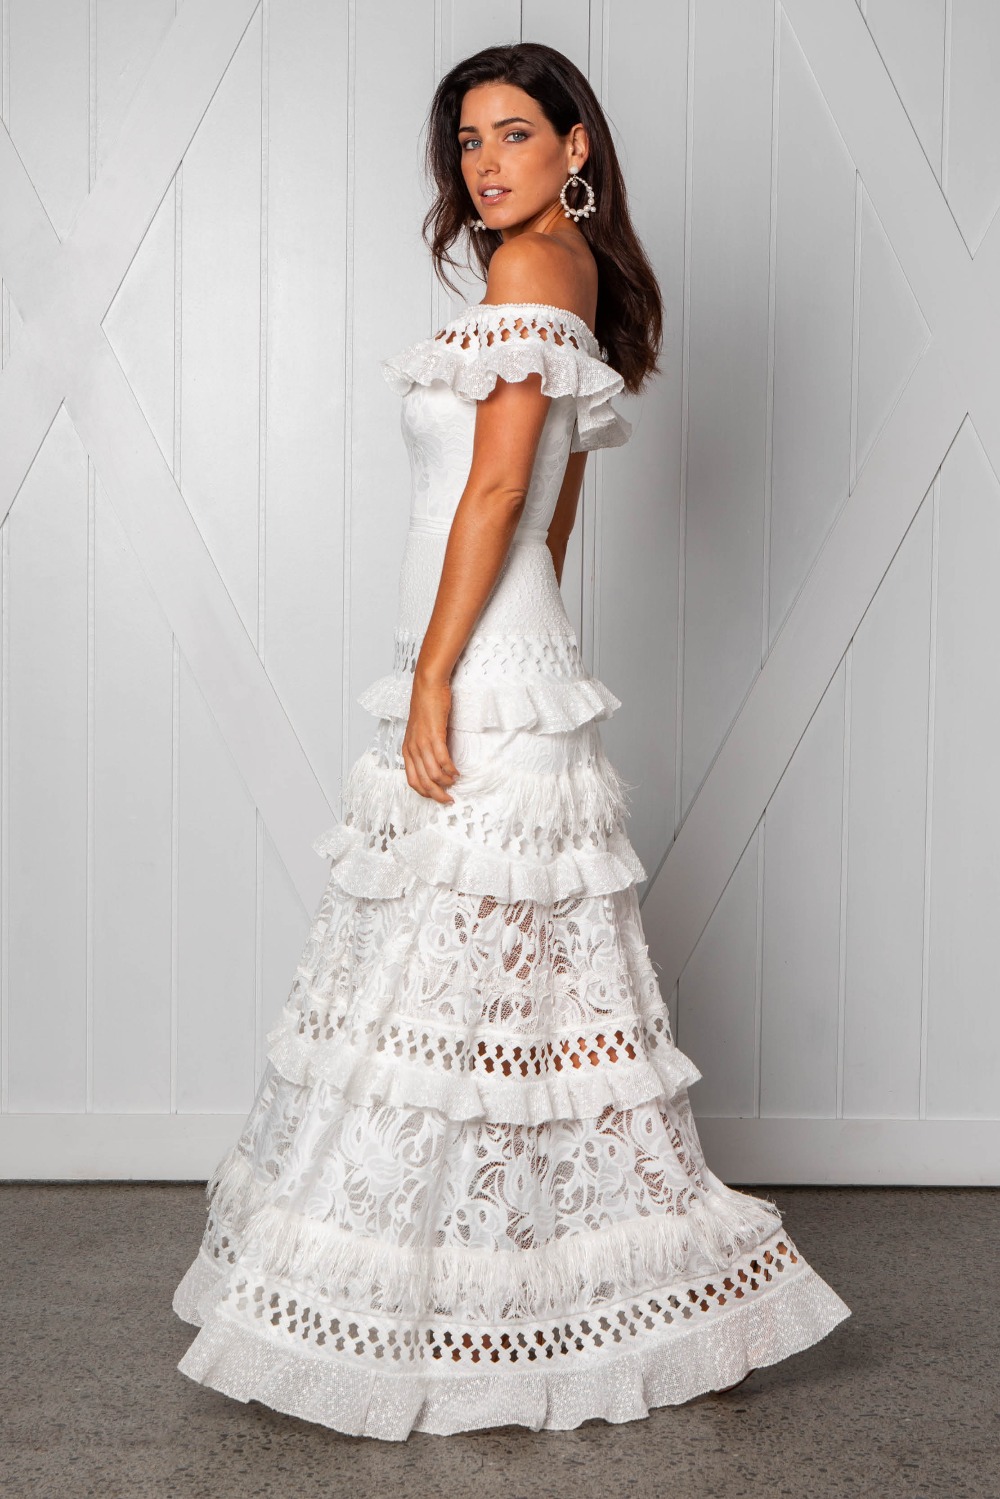 coco-wedding-dress-by-grace-loves-lace-1600-x-1067